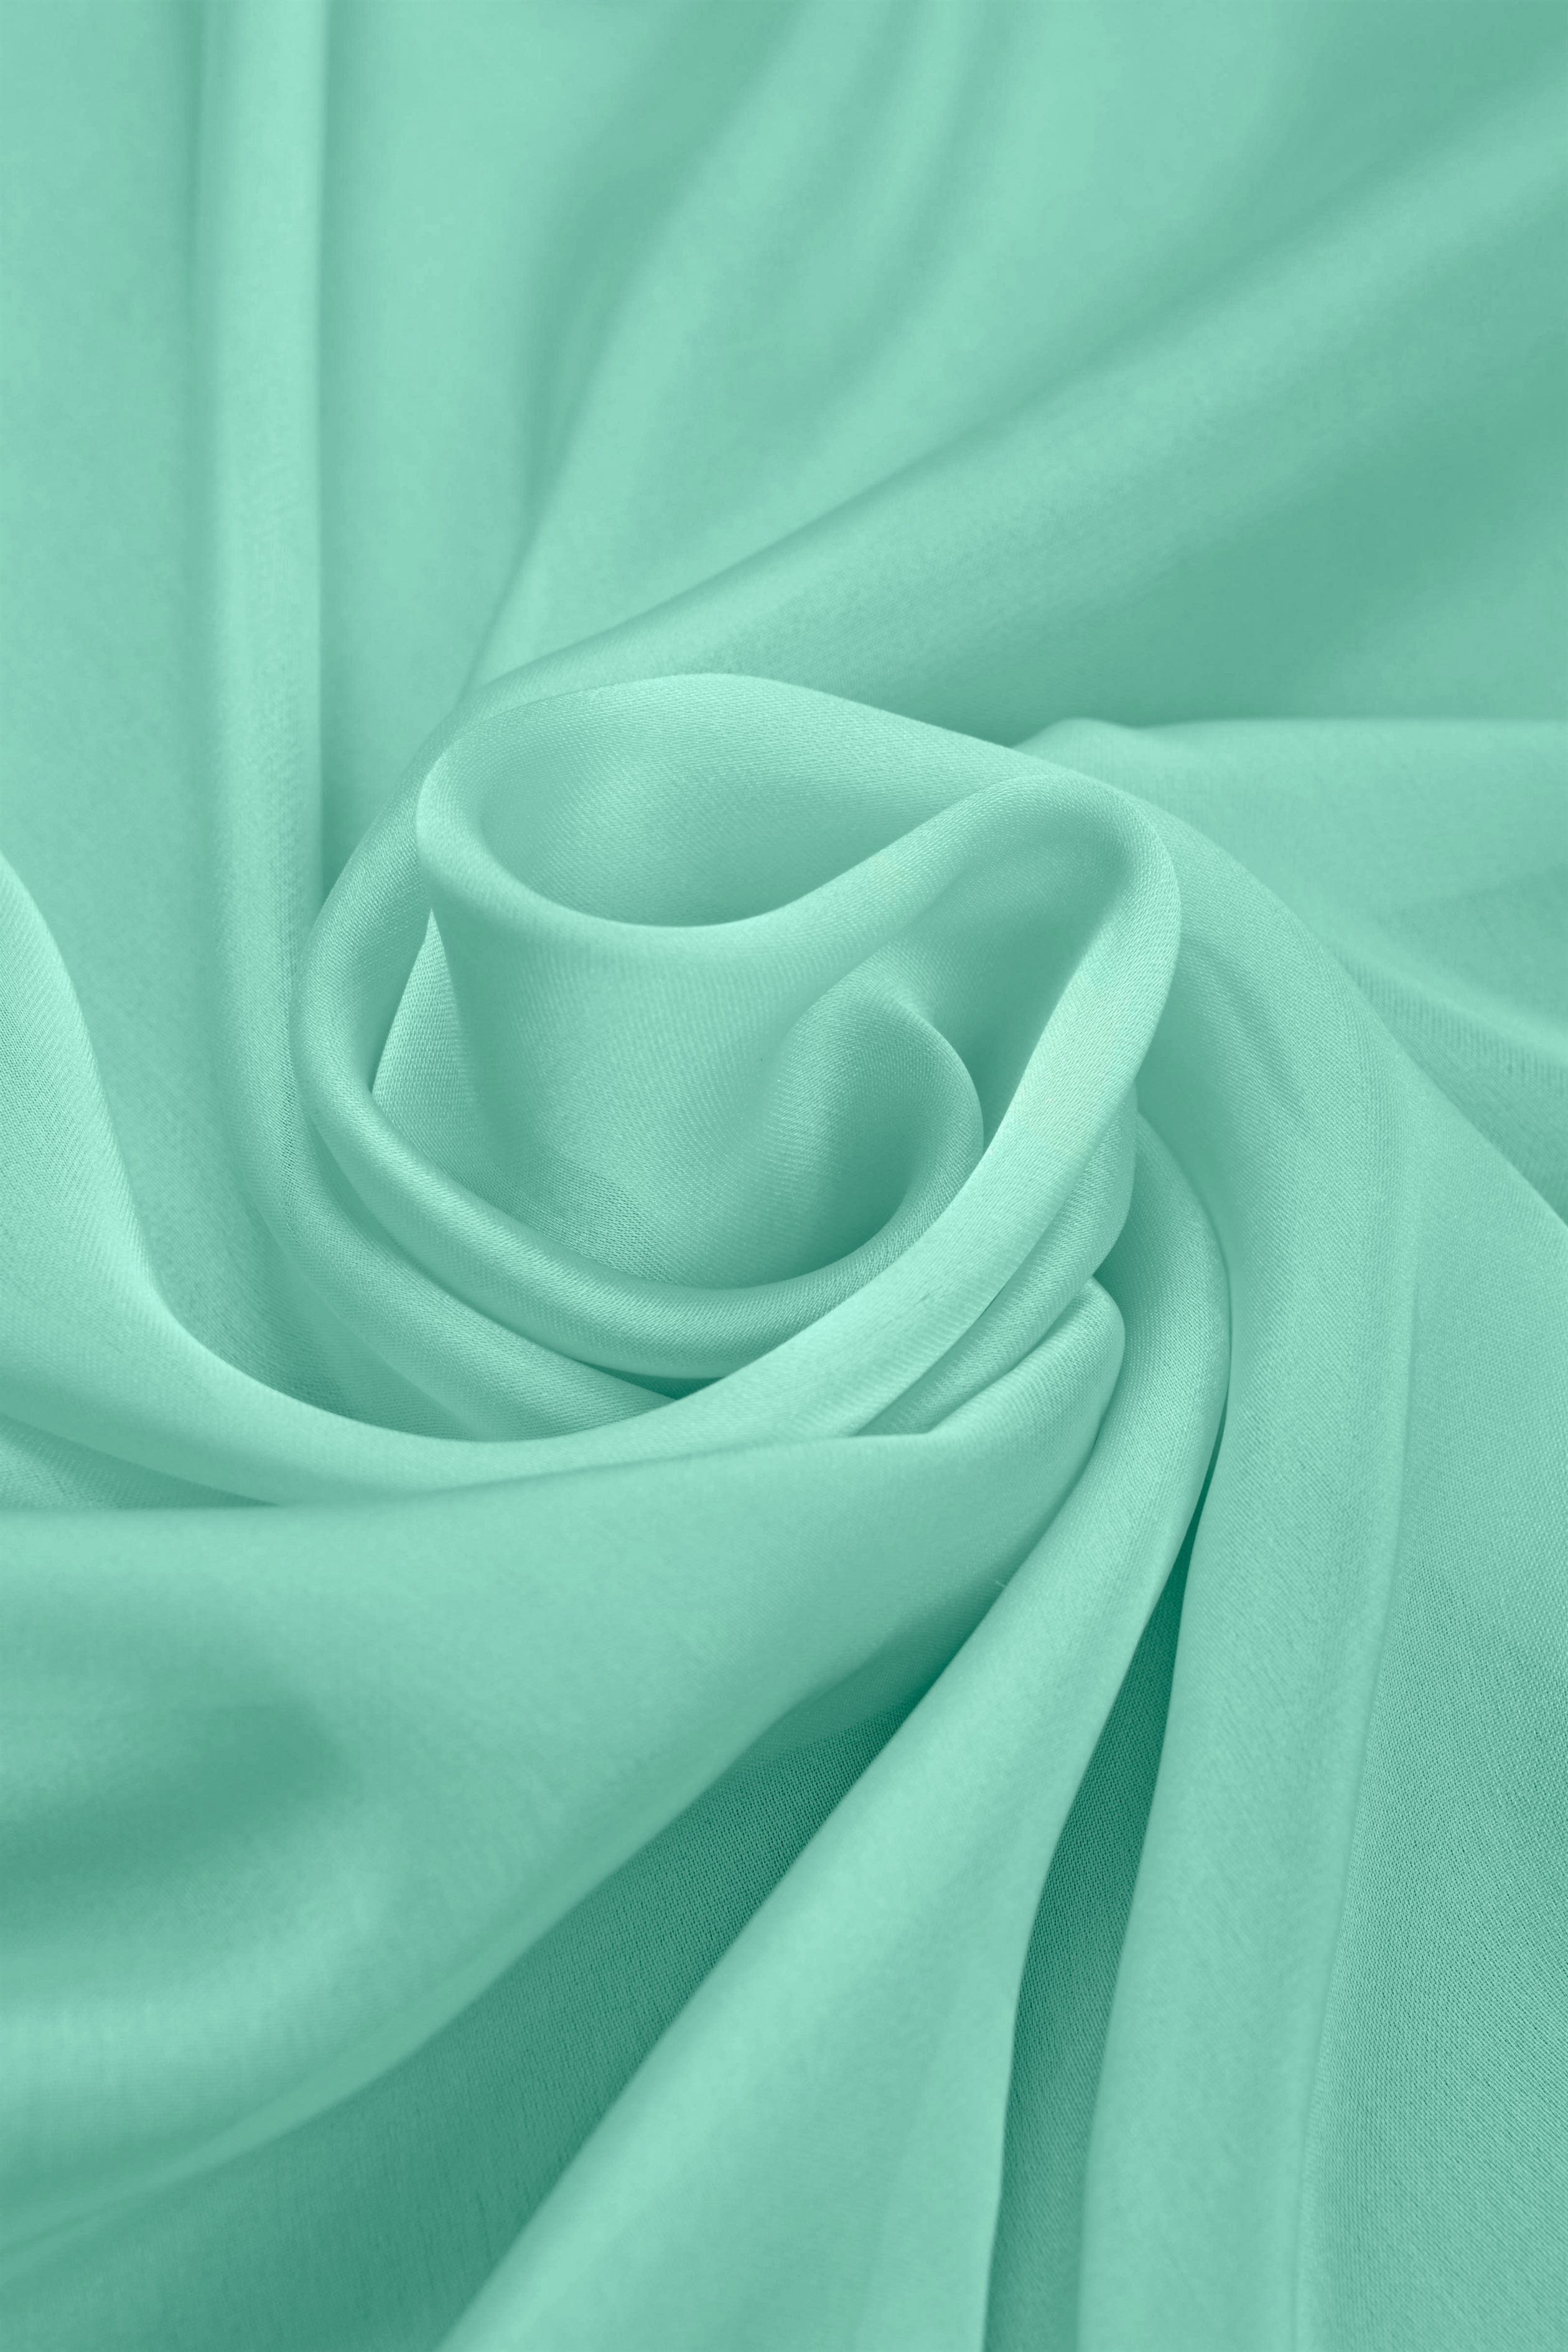 Glossy Green Plain Dyed Satin Georgette Fabric